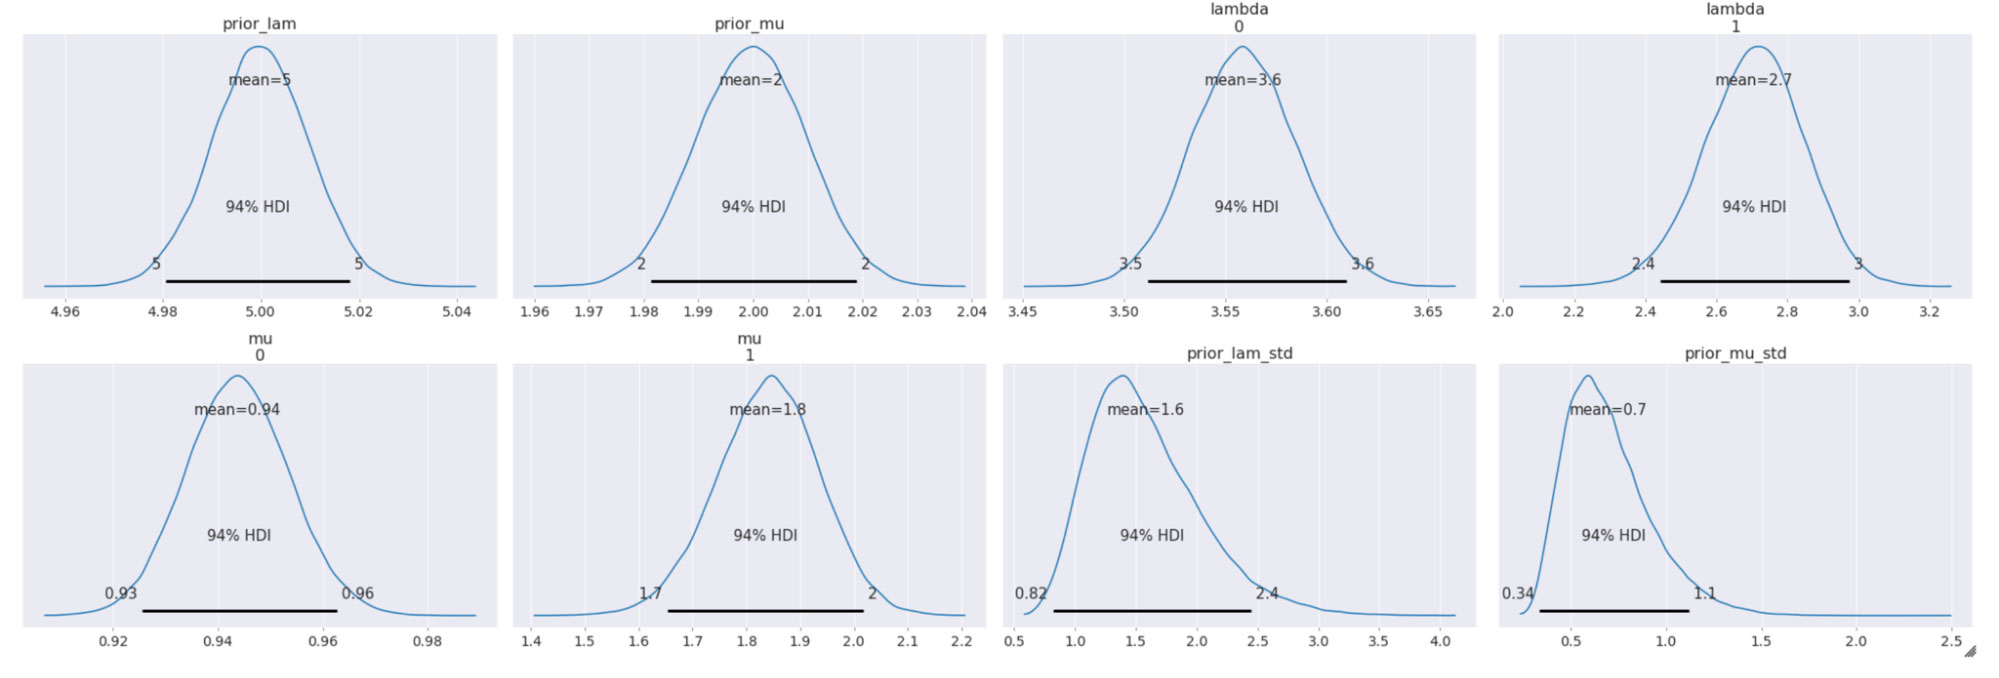 Posterior distributions of the variables with the Highest Density Intervals (HDI) 